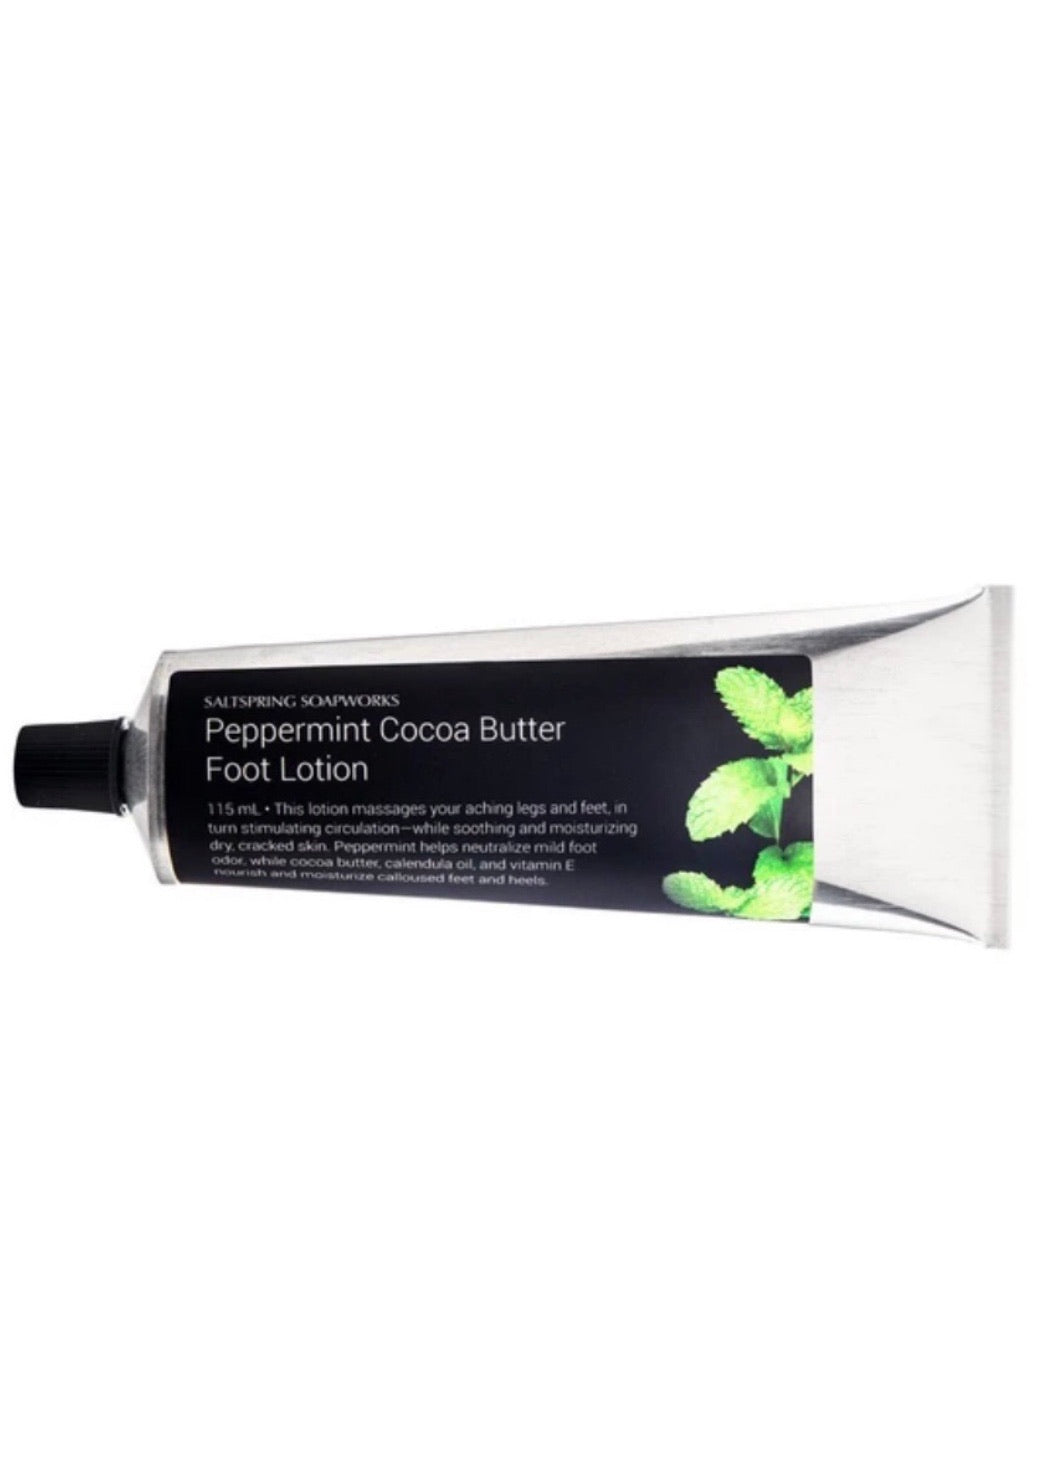 Peppermint Cocoa Butter Foot Lotion - 115ml